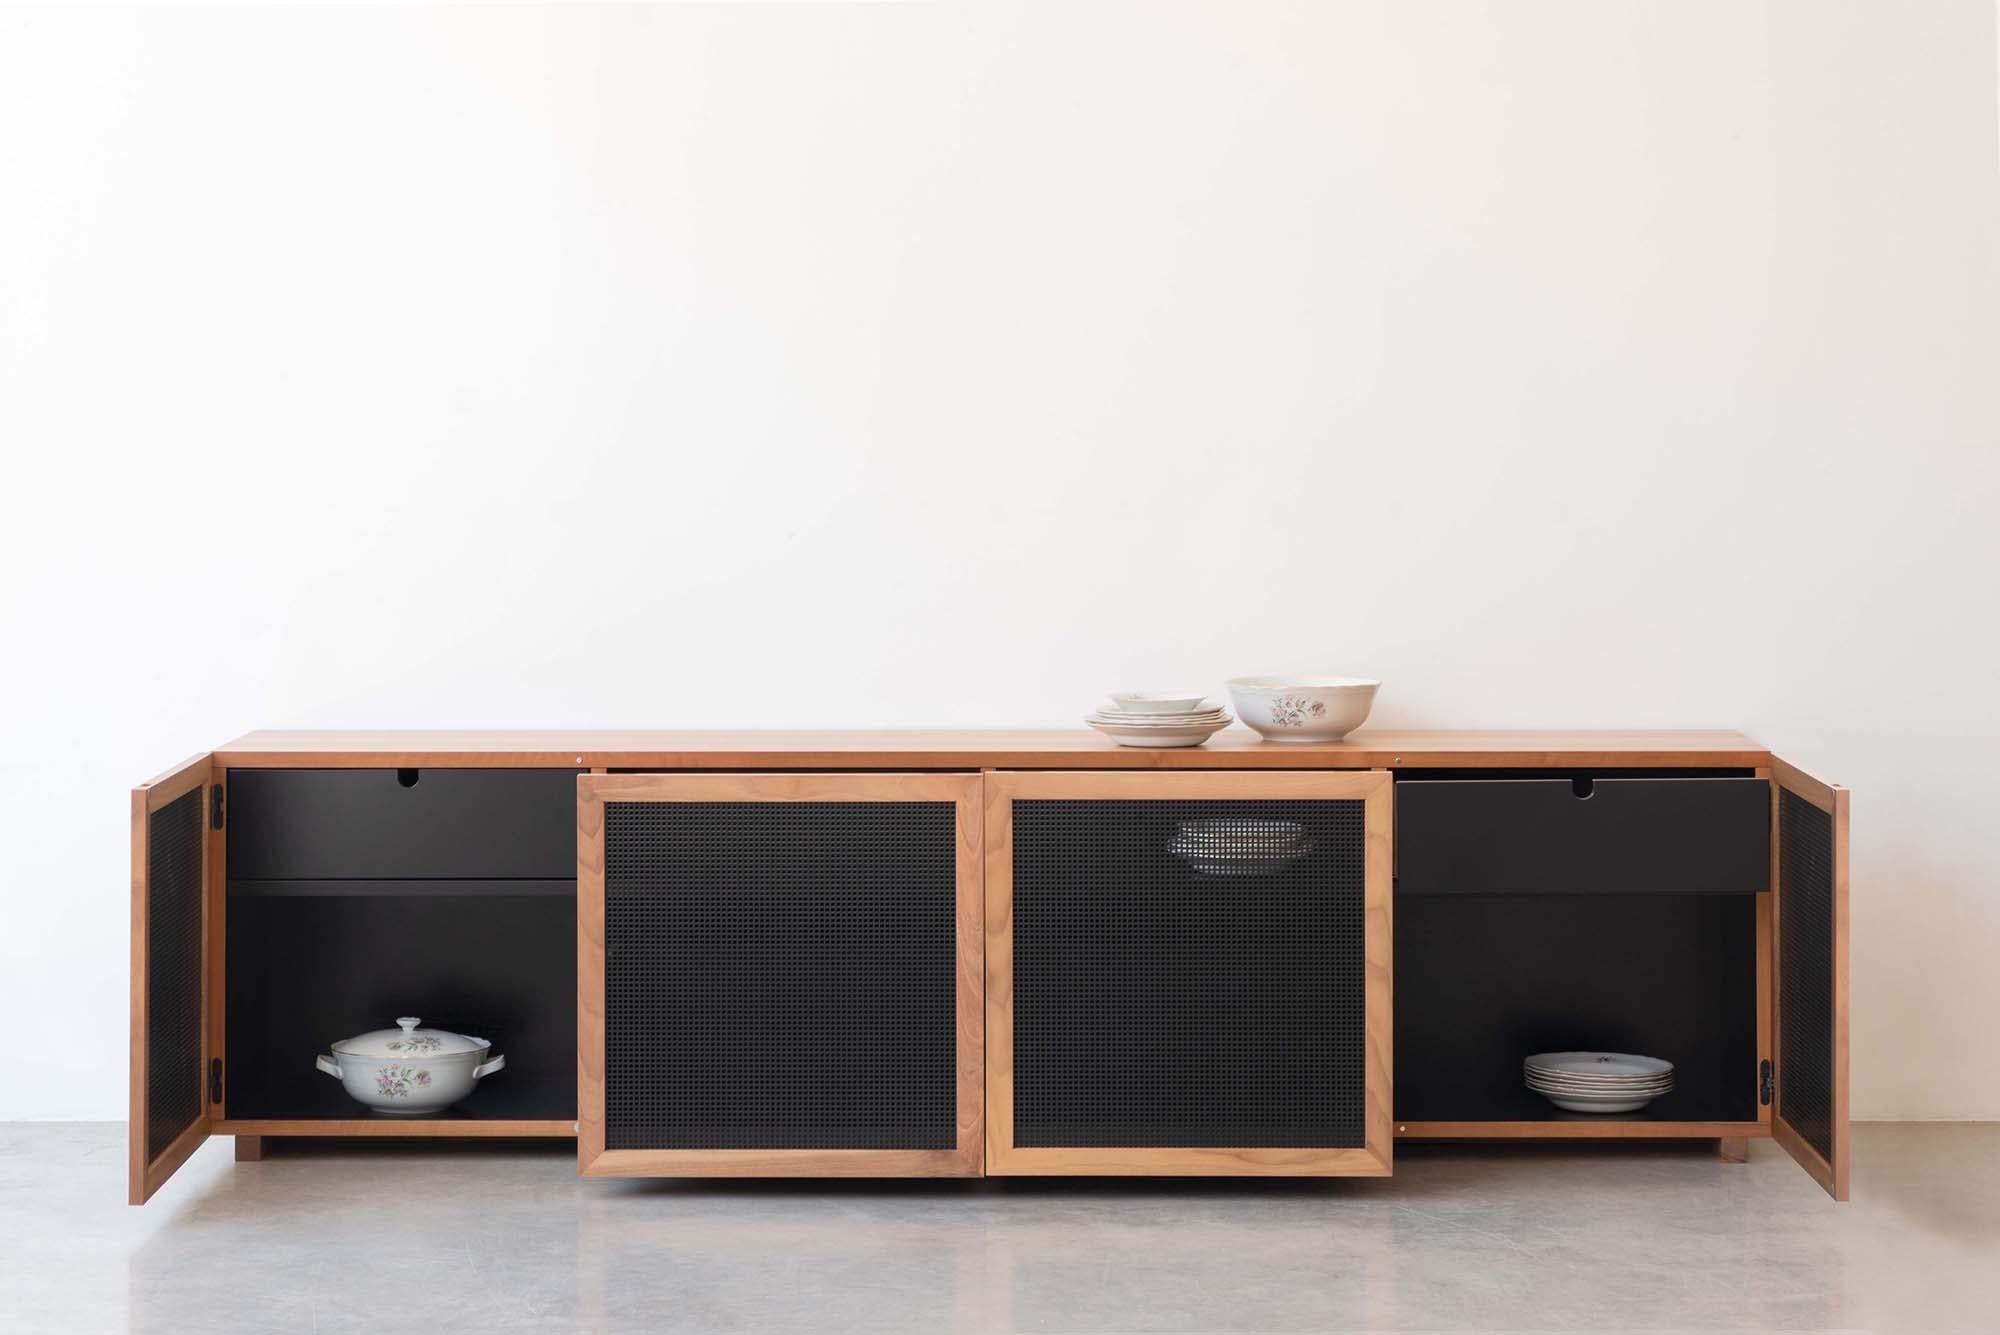 A rectangle with clean, extremely linear shapes, which expresses an essential refinement: the low sideboard is a container in walnut wood, which hides dark, lacquered shelves and drawers.
On the front, the perforated sheet metal doors give air and